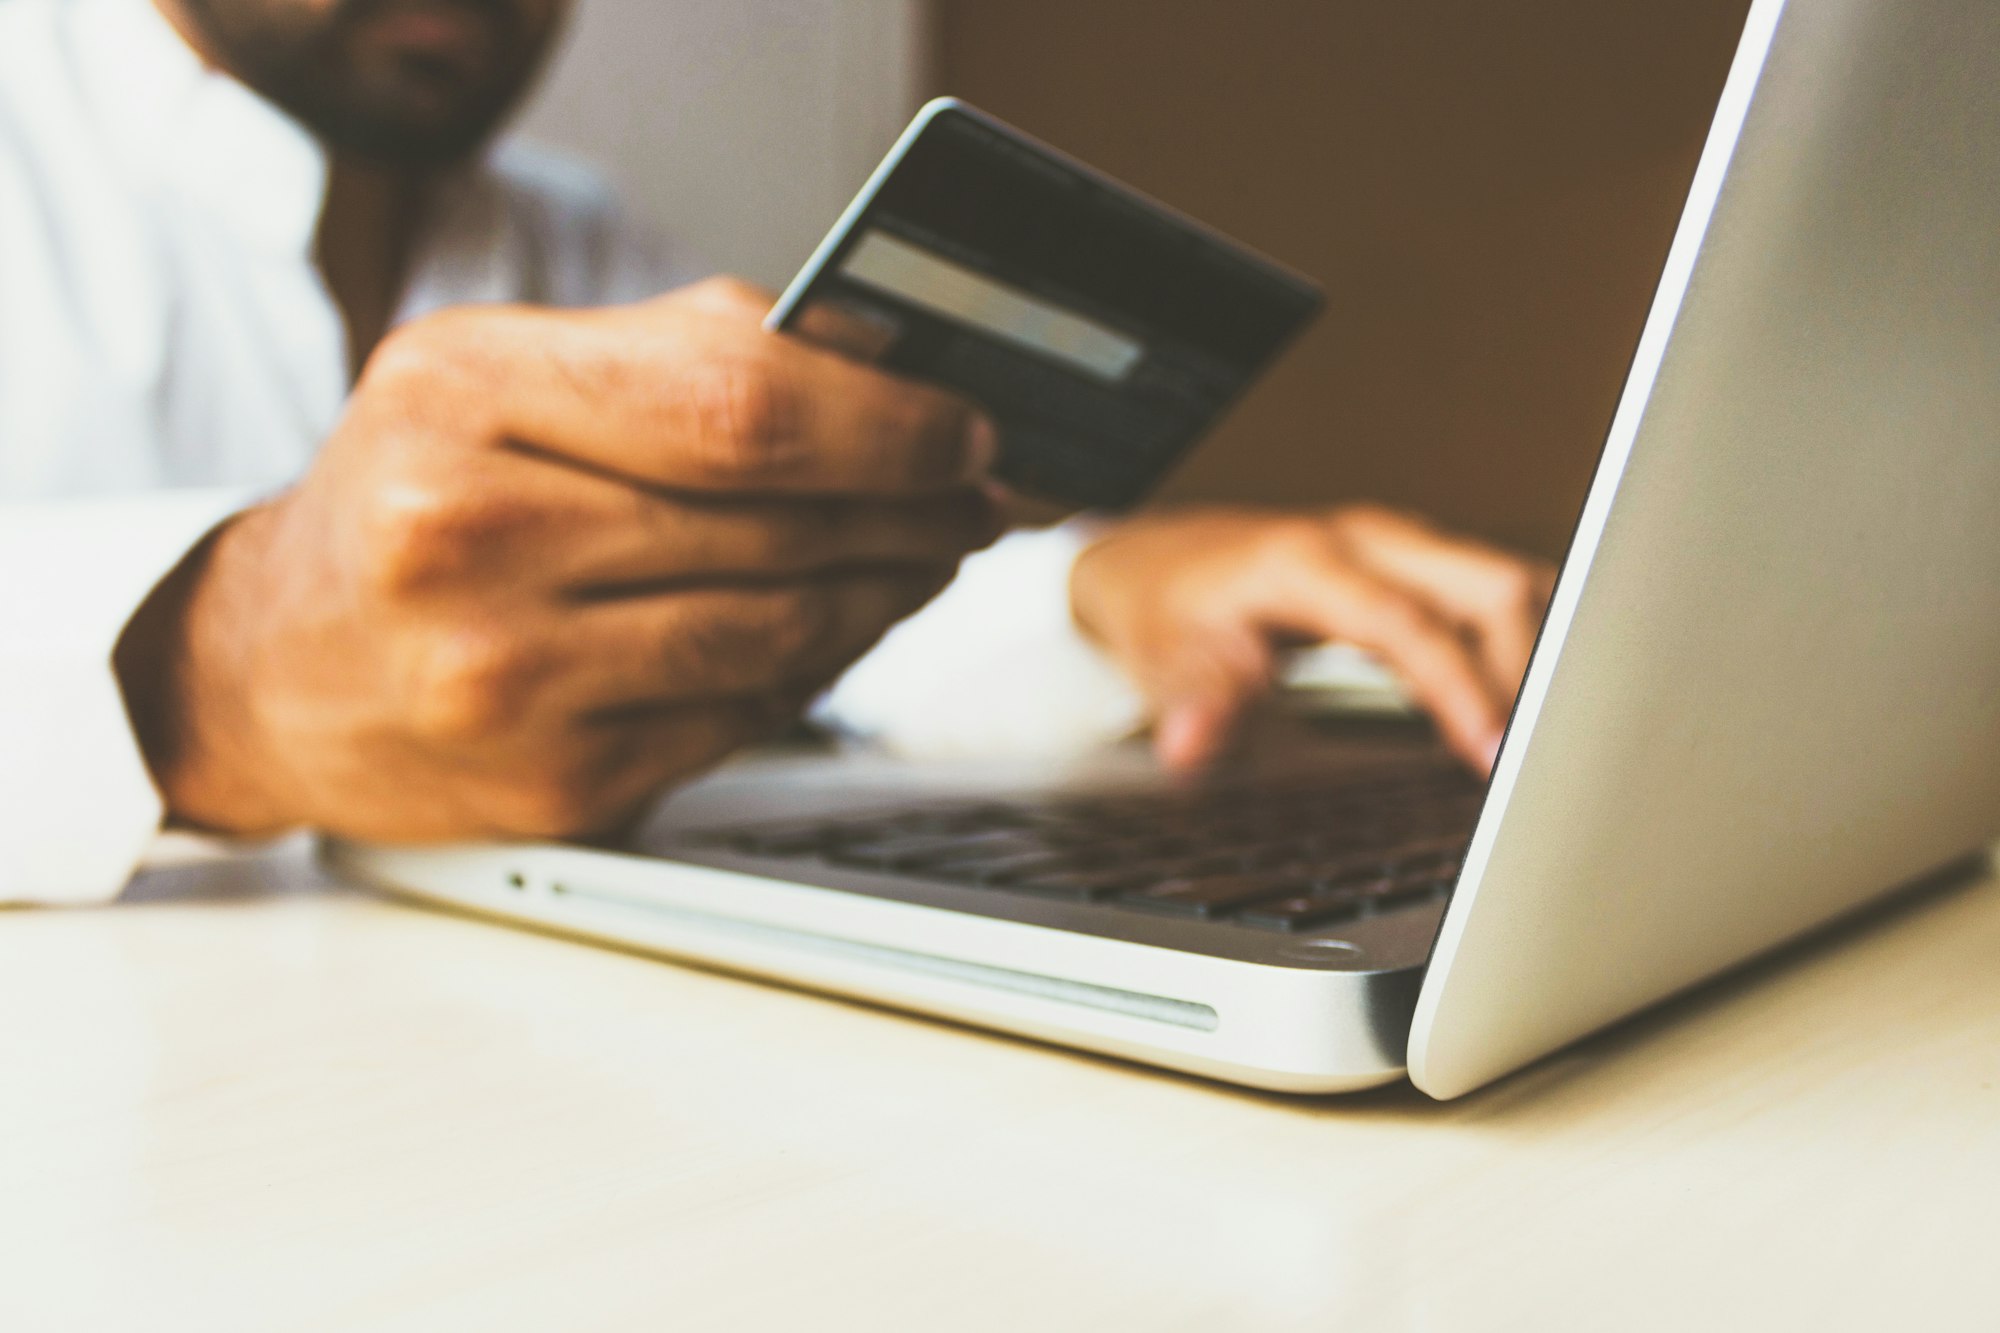 E-commerce: 3 ways to increase conversion with an optimised payment experience